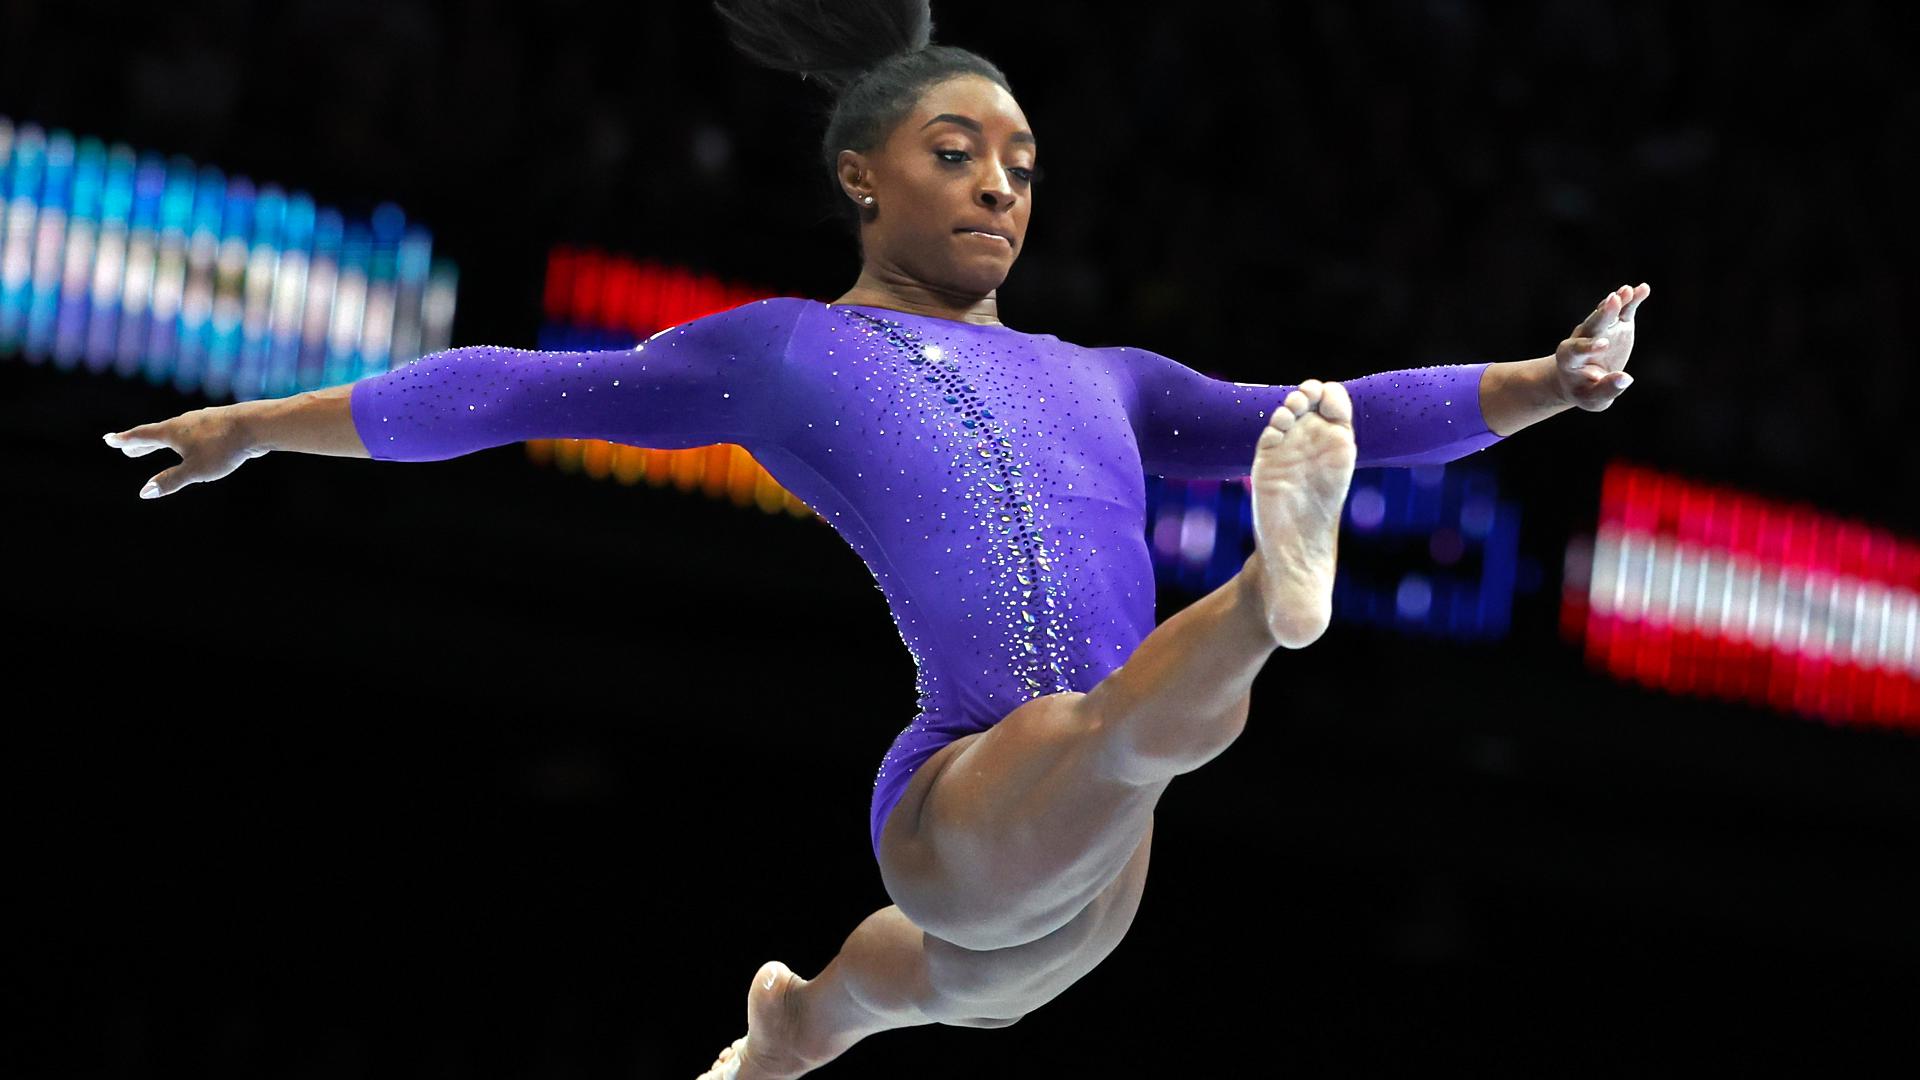 With several different disciplines and multiple events, here's how to keep track of all the gymnastics competitions in Paris.